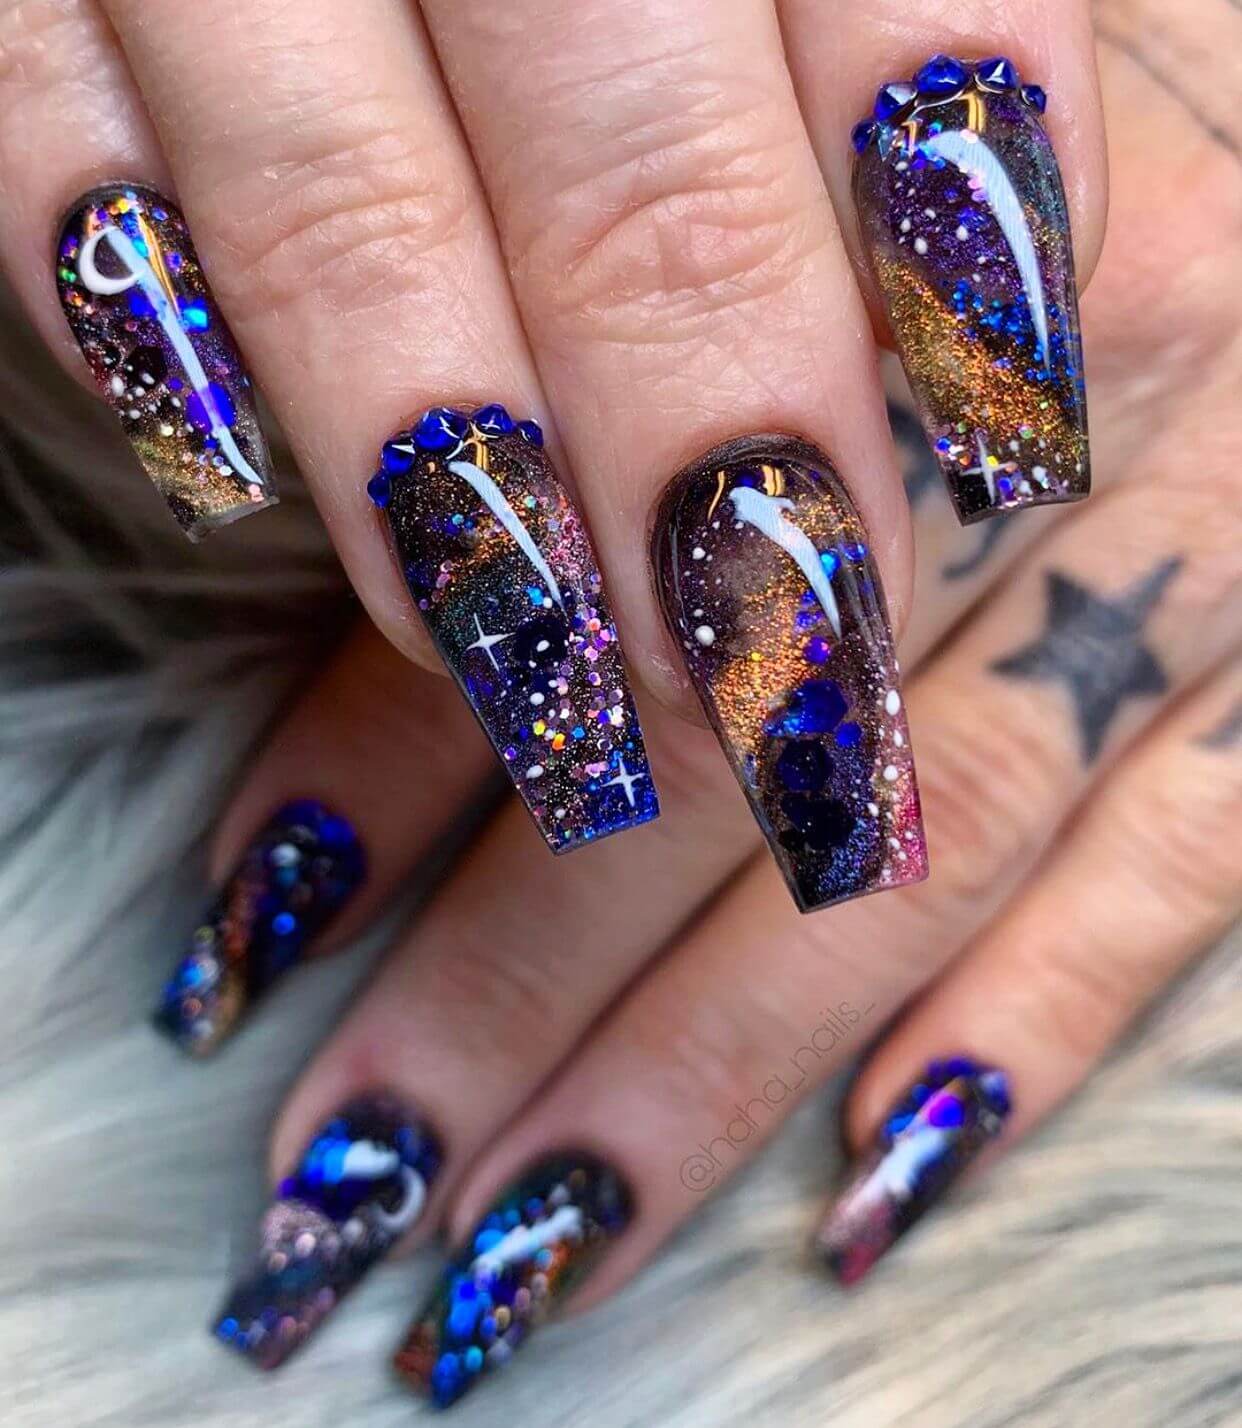 These galaxy acrylic nails